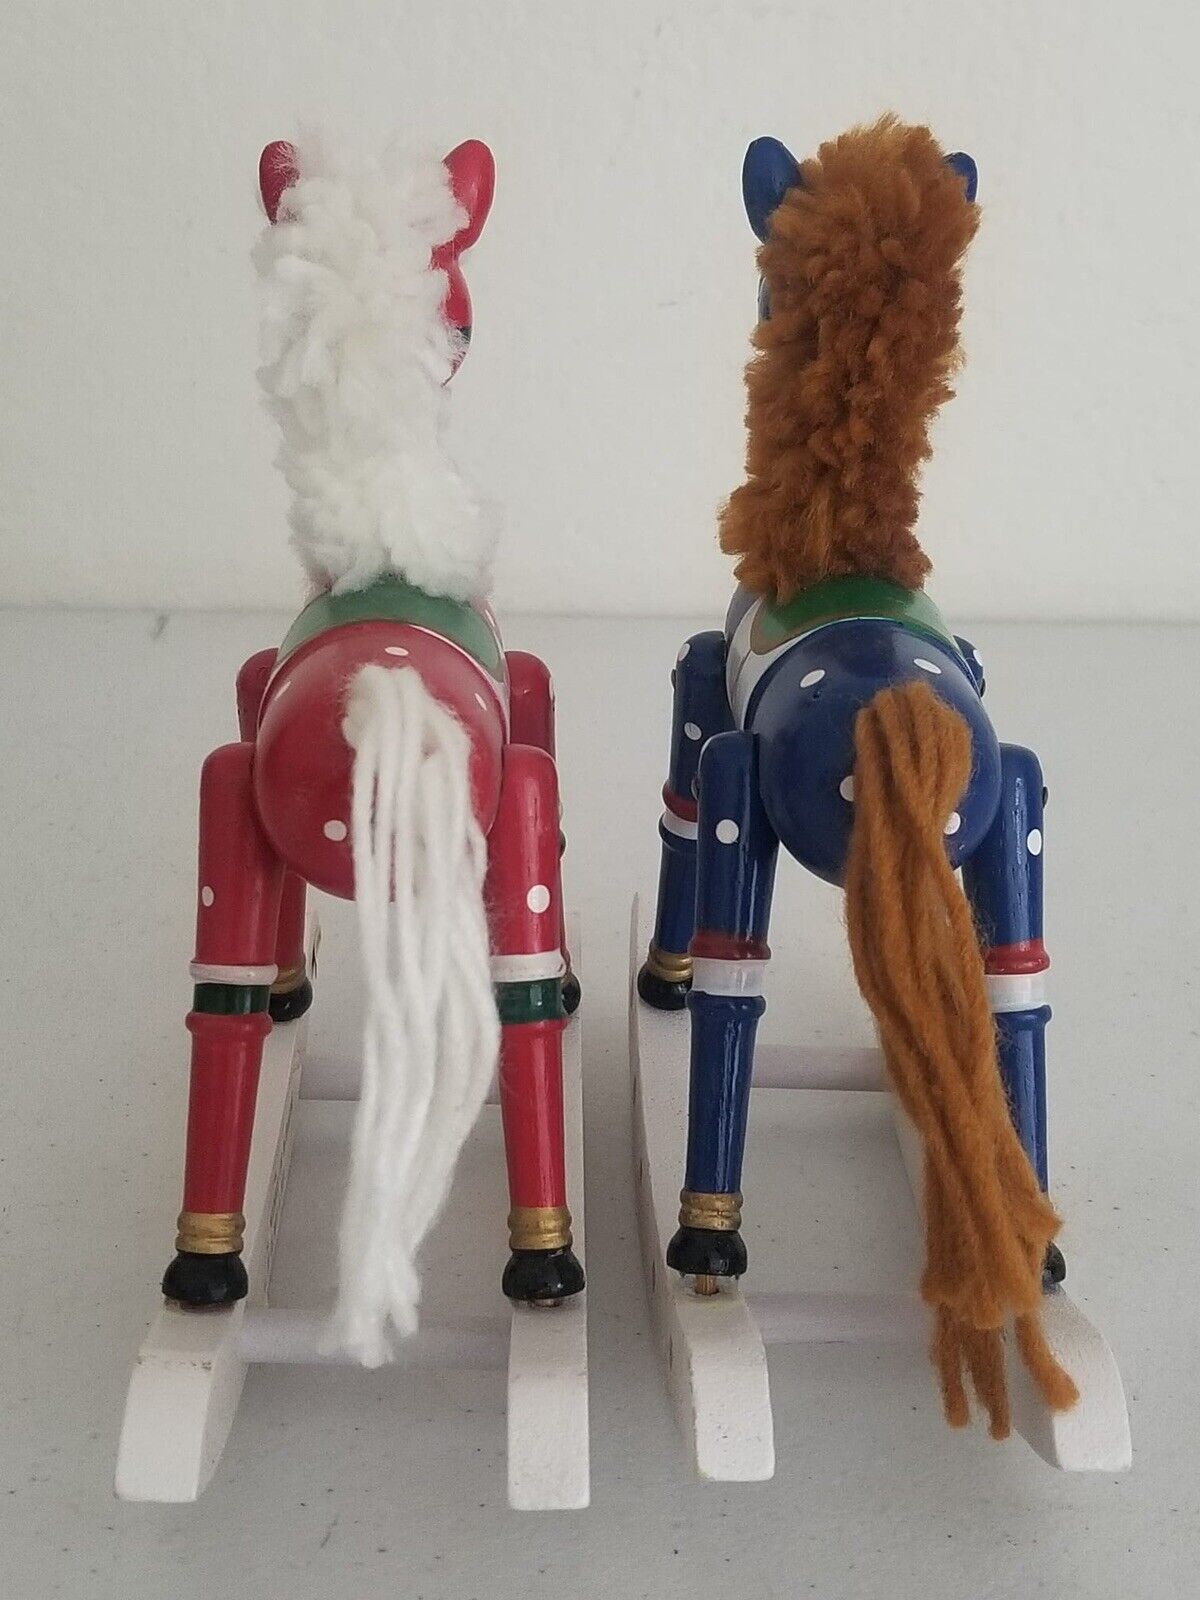 Charming Vintage Wooden Rocking Horse Christmas Decor with Yarn Mane - Collectible 6" Ornament Set - TreasuTiques